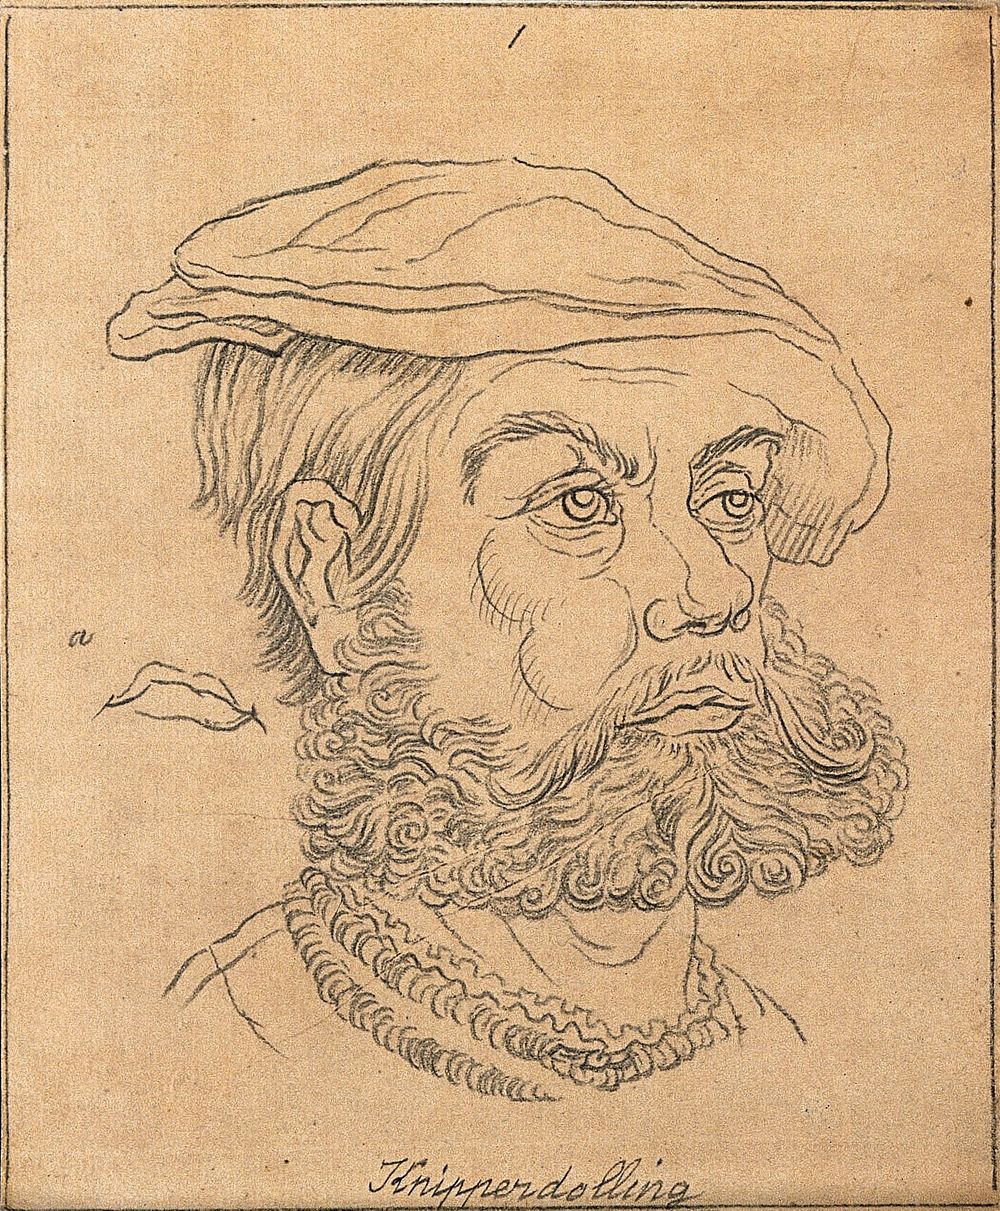 Knipperdolling, exhibited in Lavater's work on physiognomy as a 'famous and sanguinary fanatic'. Drawing, c. 1789.